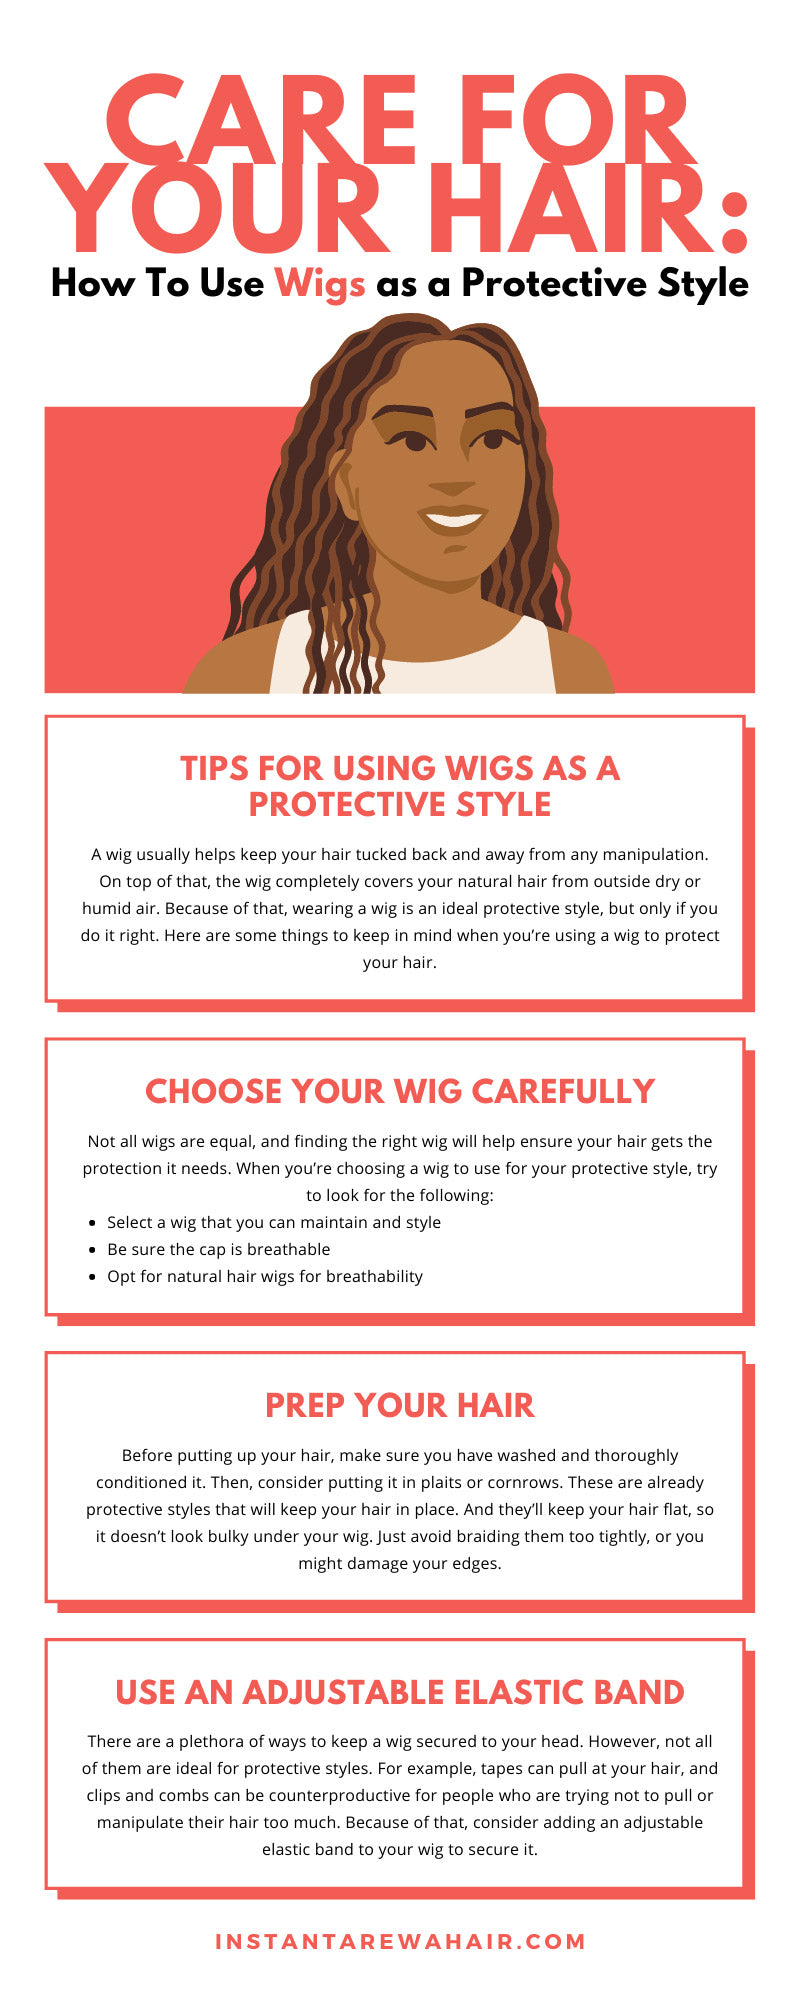 Care for Your Hair: How To Use Wigs as a Protective Style